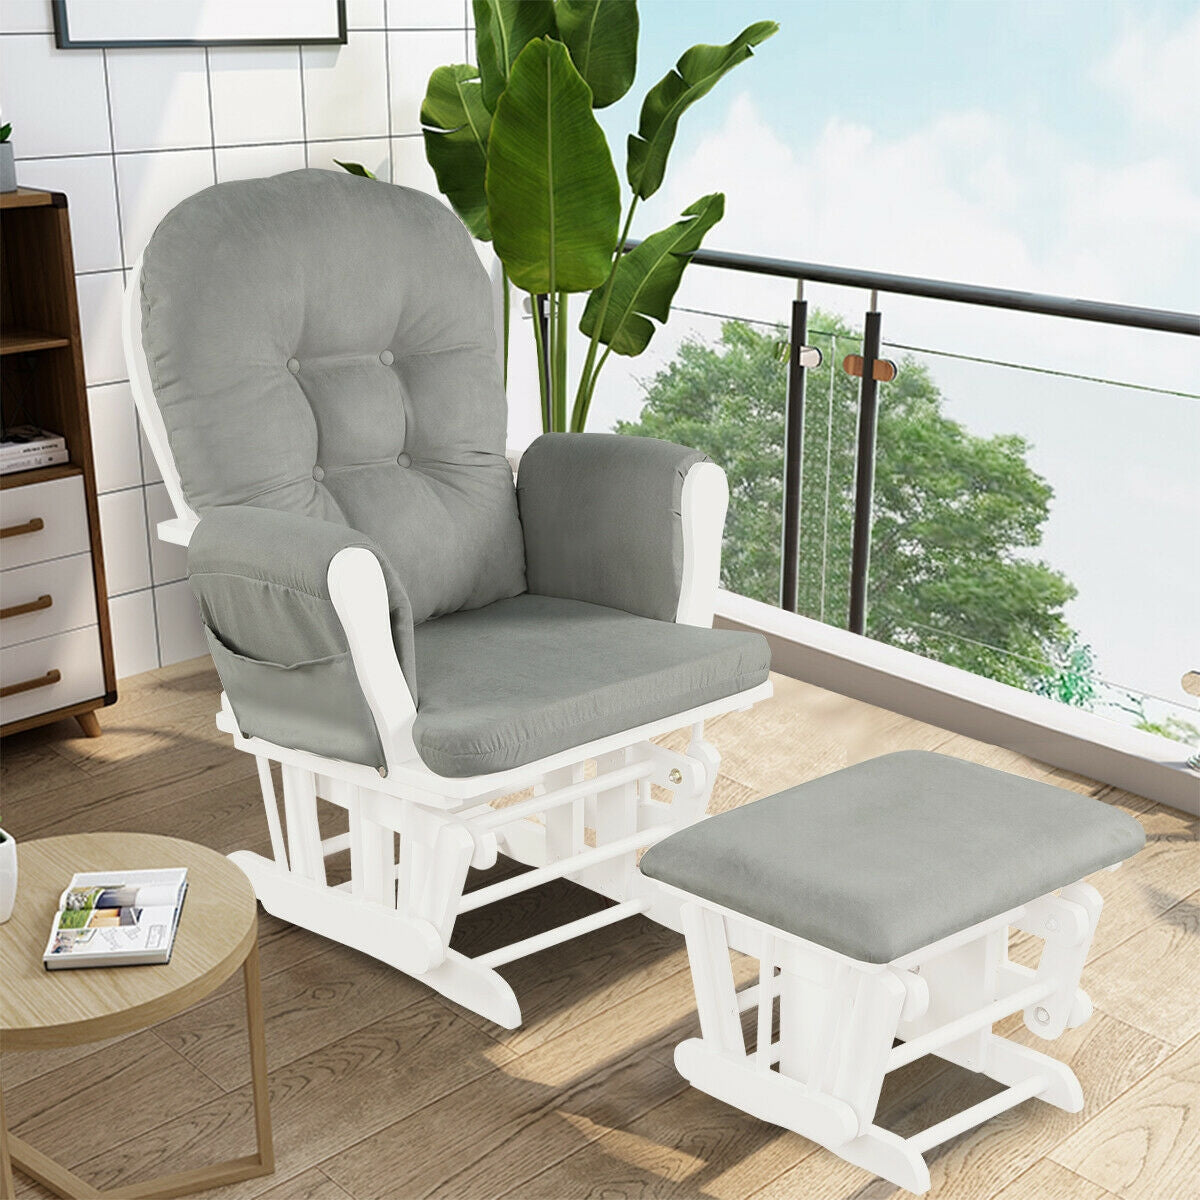 Wood Glider and Ottoman Set with Padded Armrests and Detachable Cushion-Light Gray